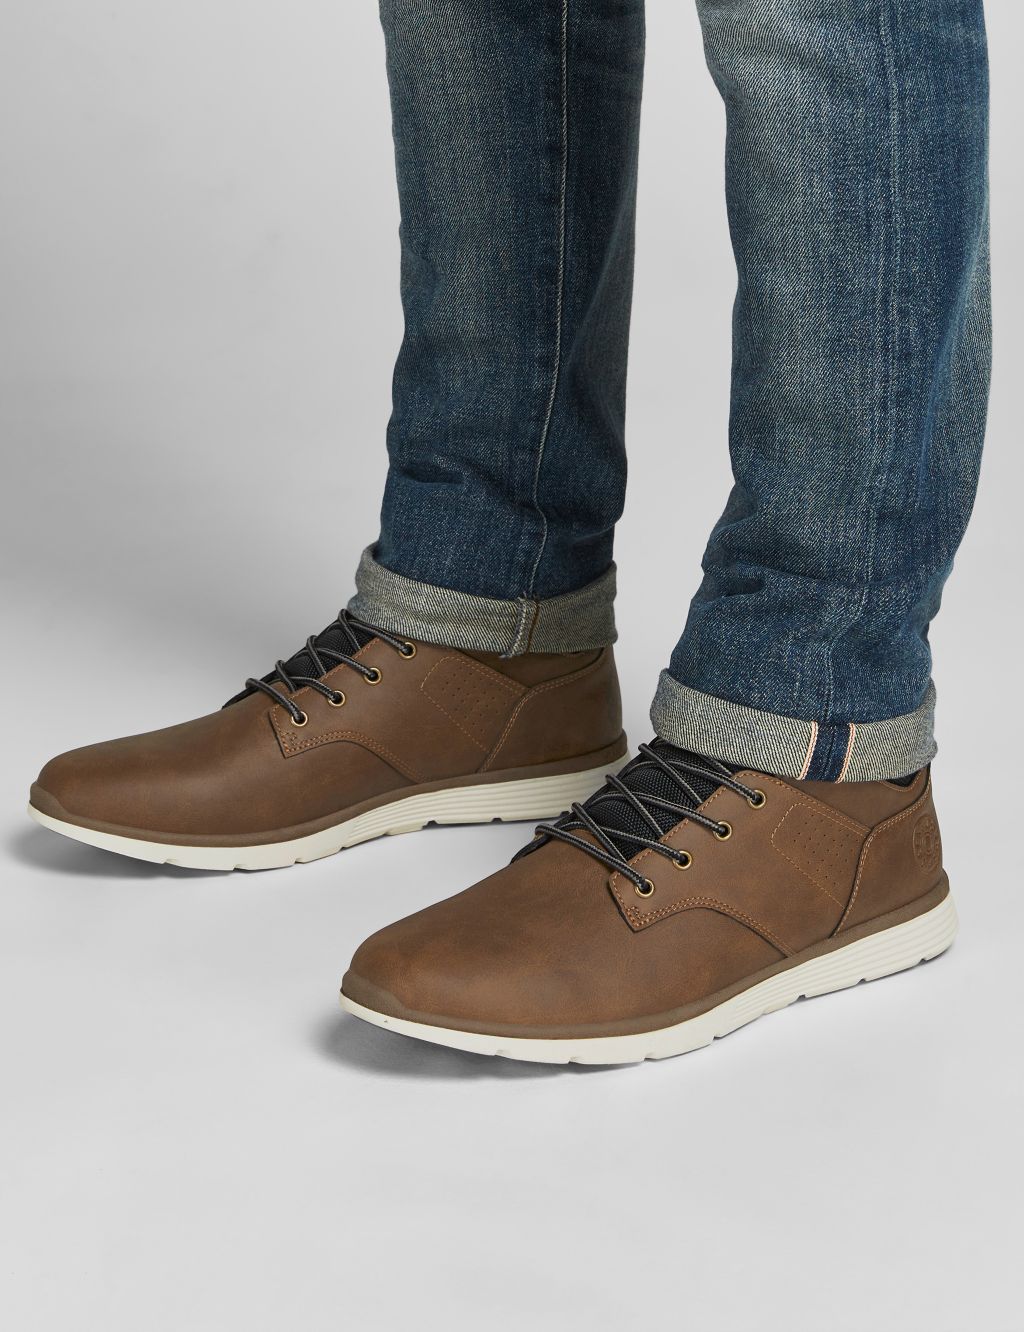 Casual Boots image 1